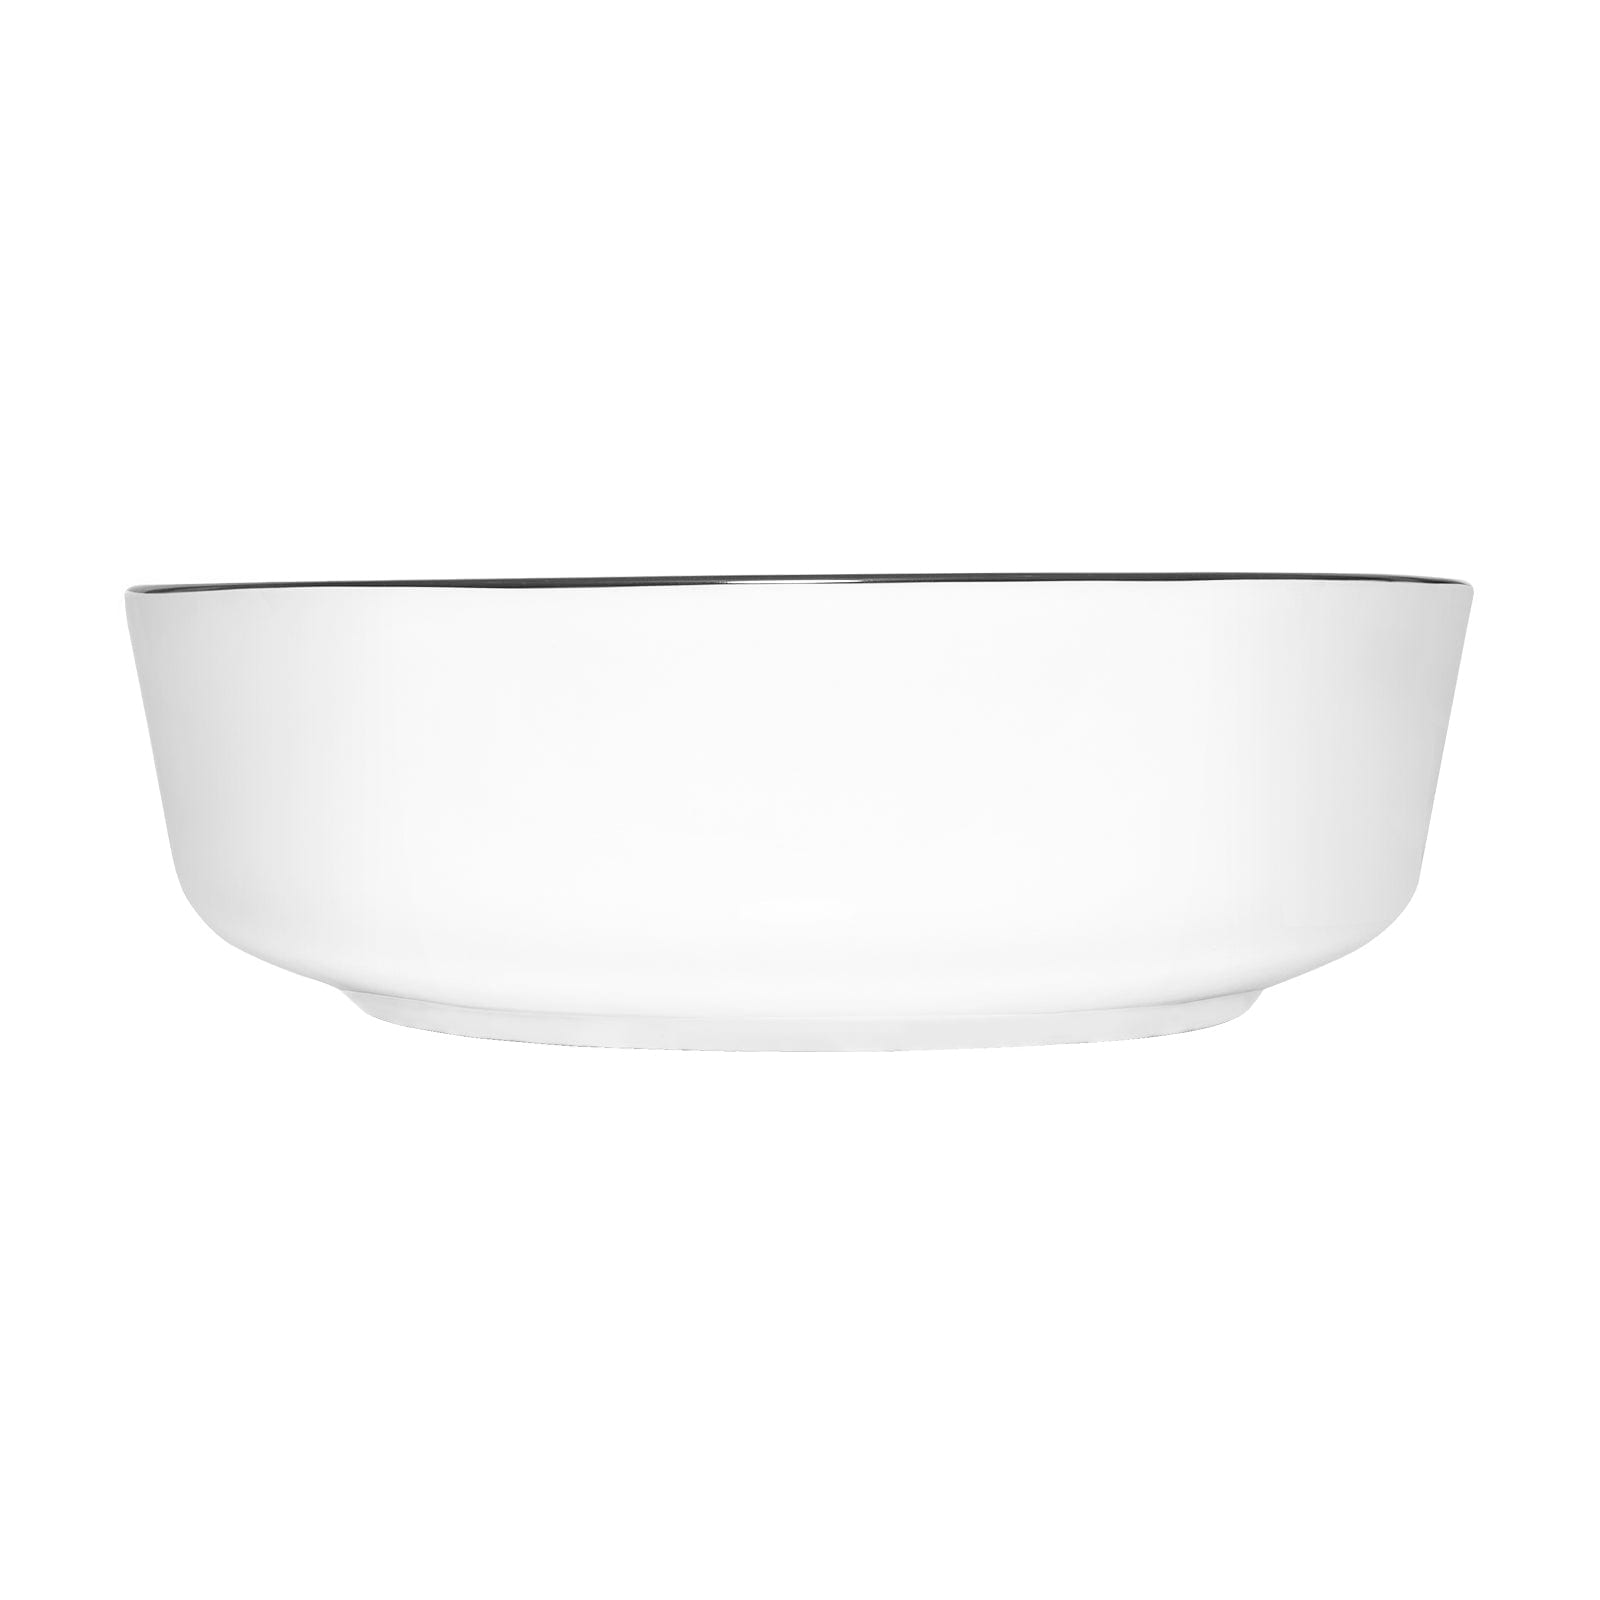 Elecwish White Ceramic Vessel Sink BG1009 without faucet